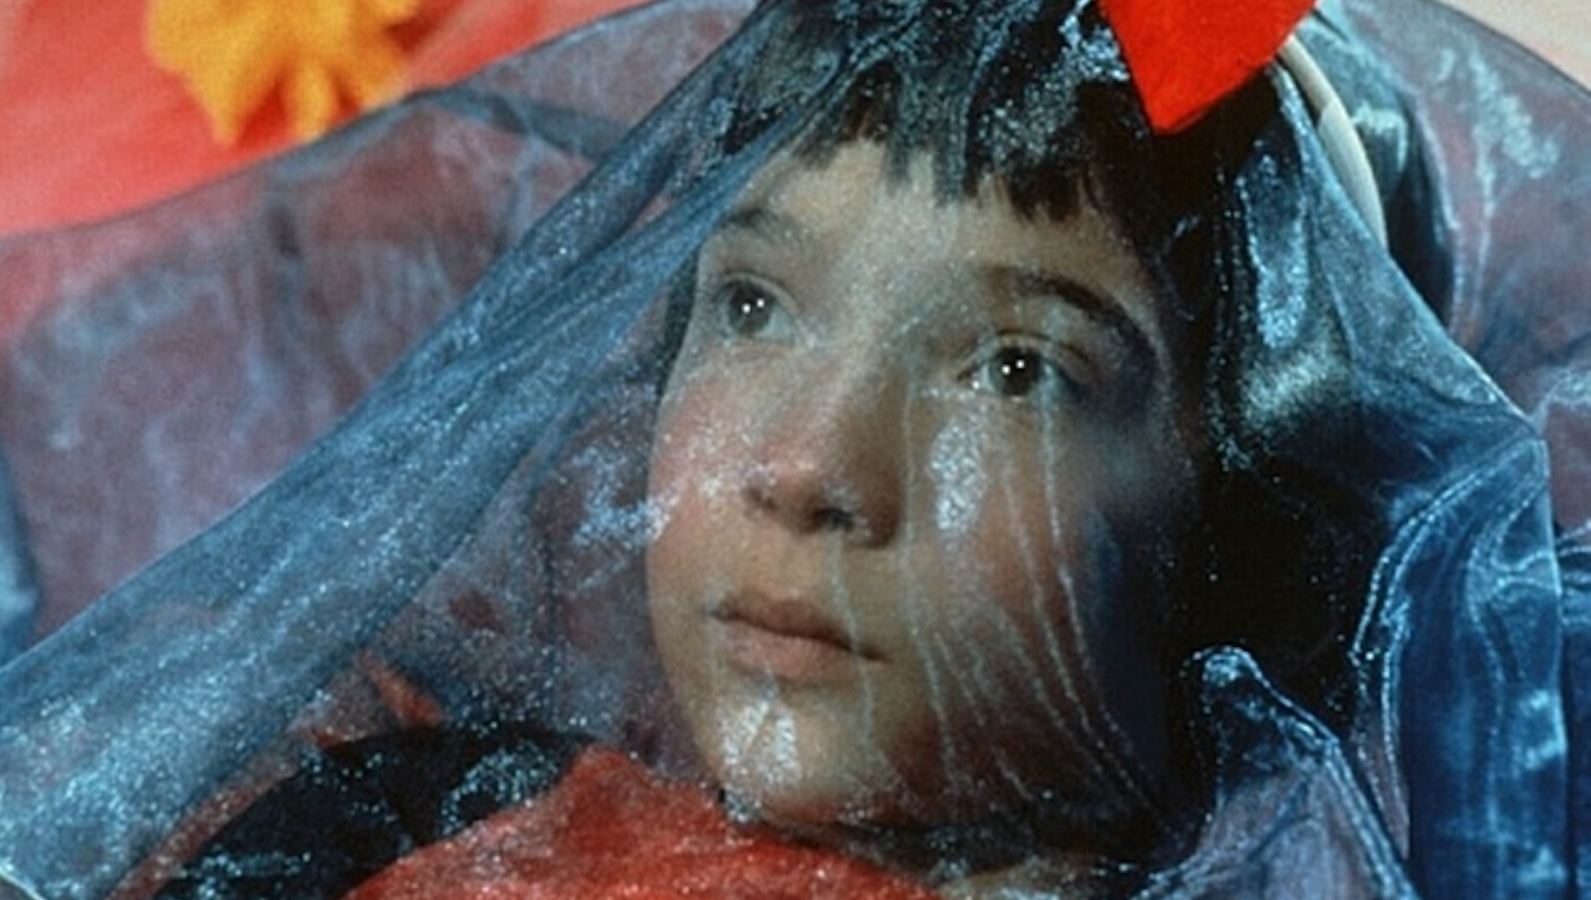 A close up of a dark haired child looking up from behind a blue veil